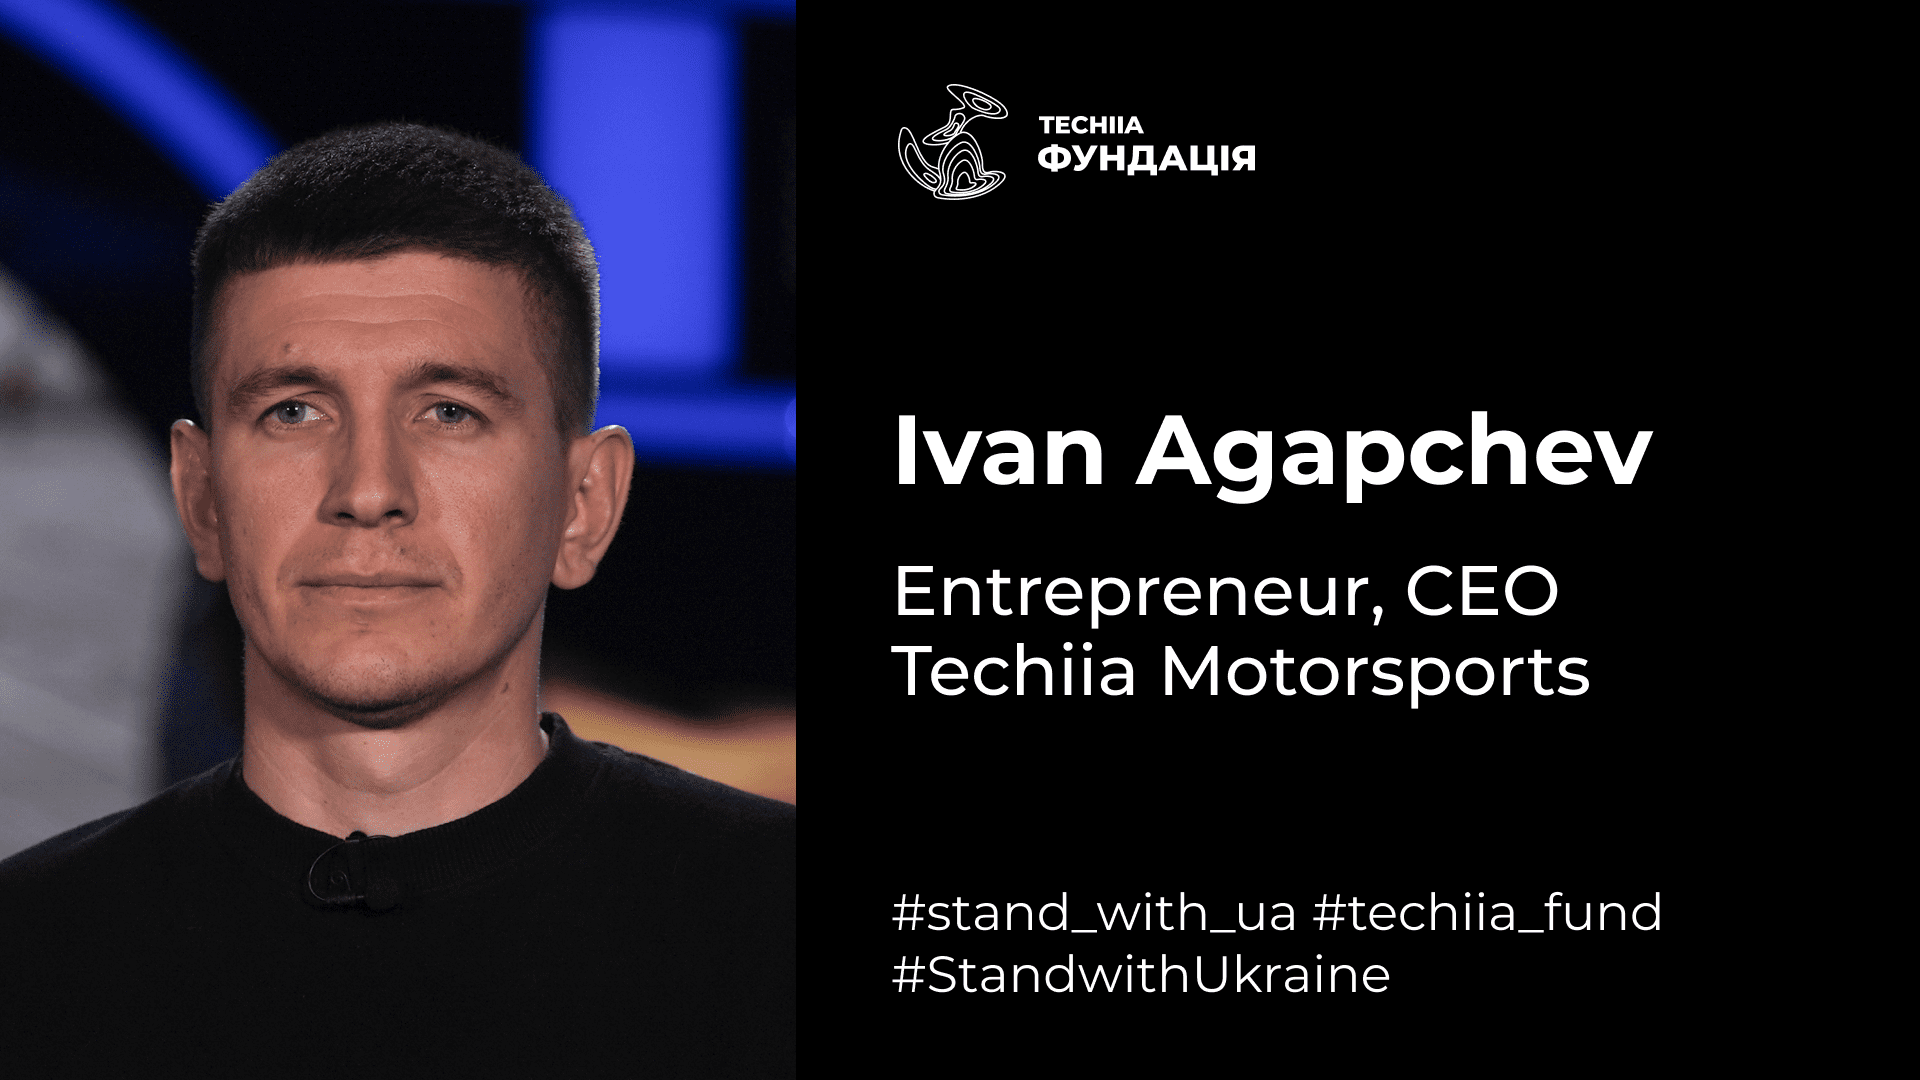 "The only way to stop this war is to get Russian terrorists out of Ukraine," said Ivan Agapchev, CEO of TECHIIA Motorsports